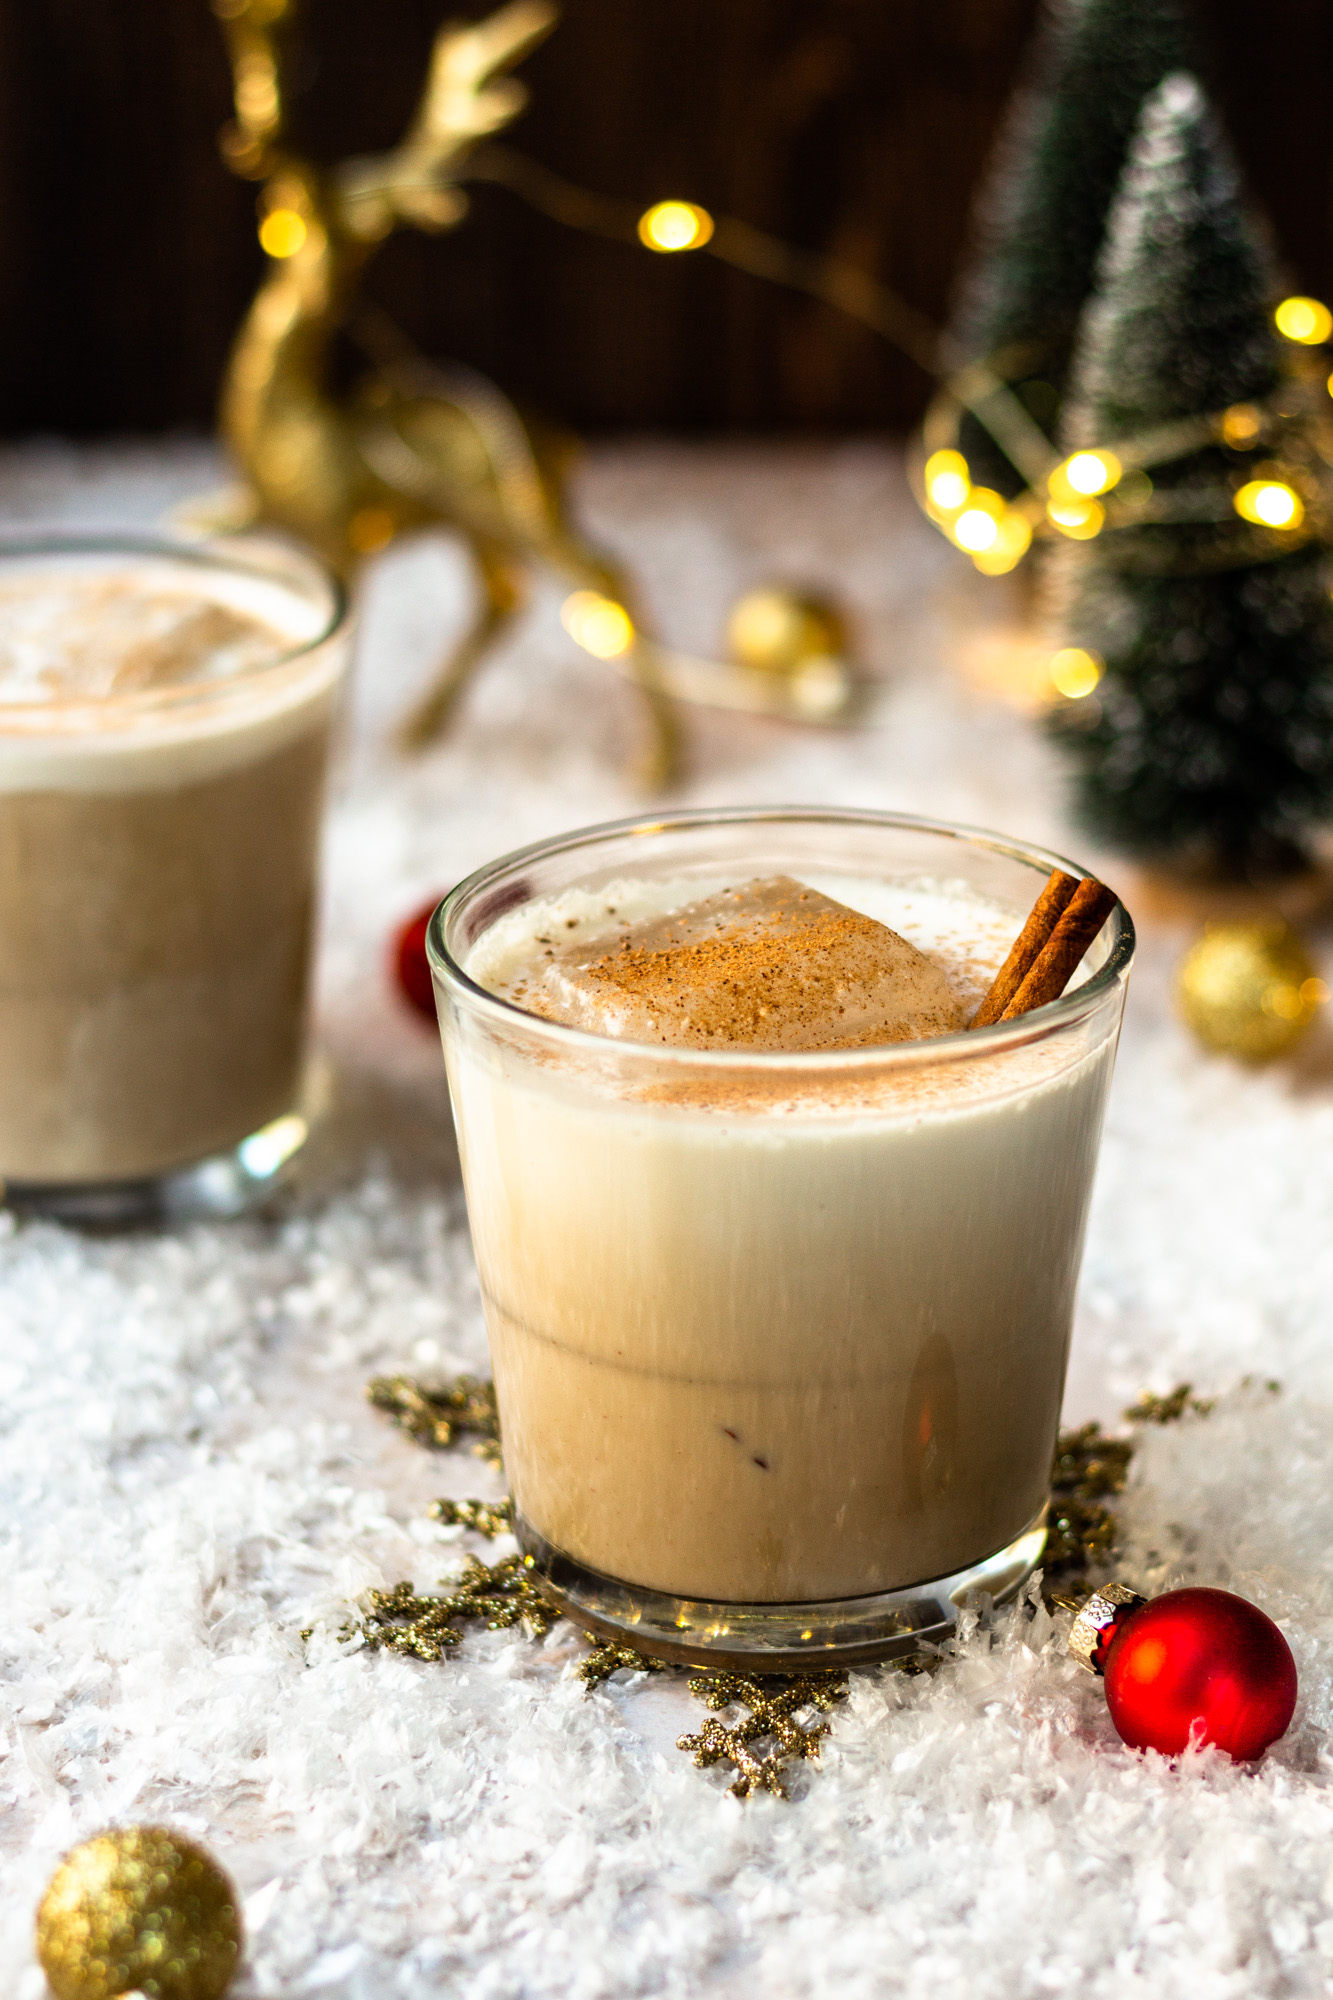 Types of Glass to Serve With Eggnog